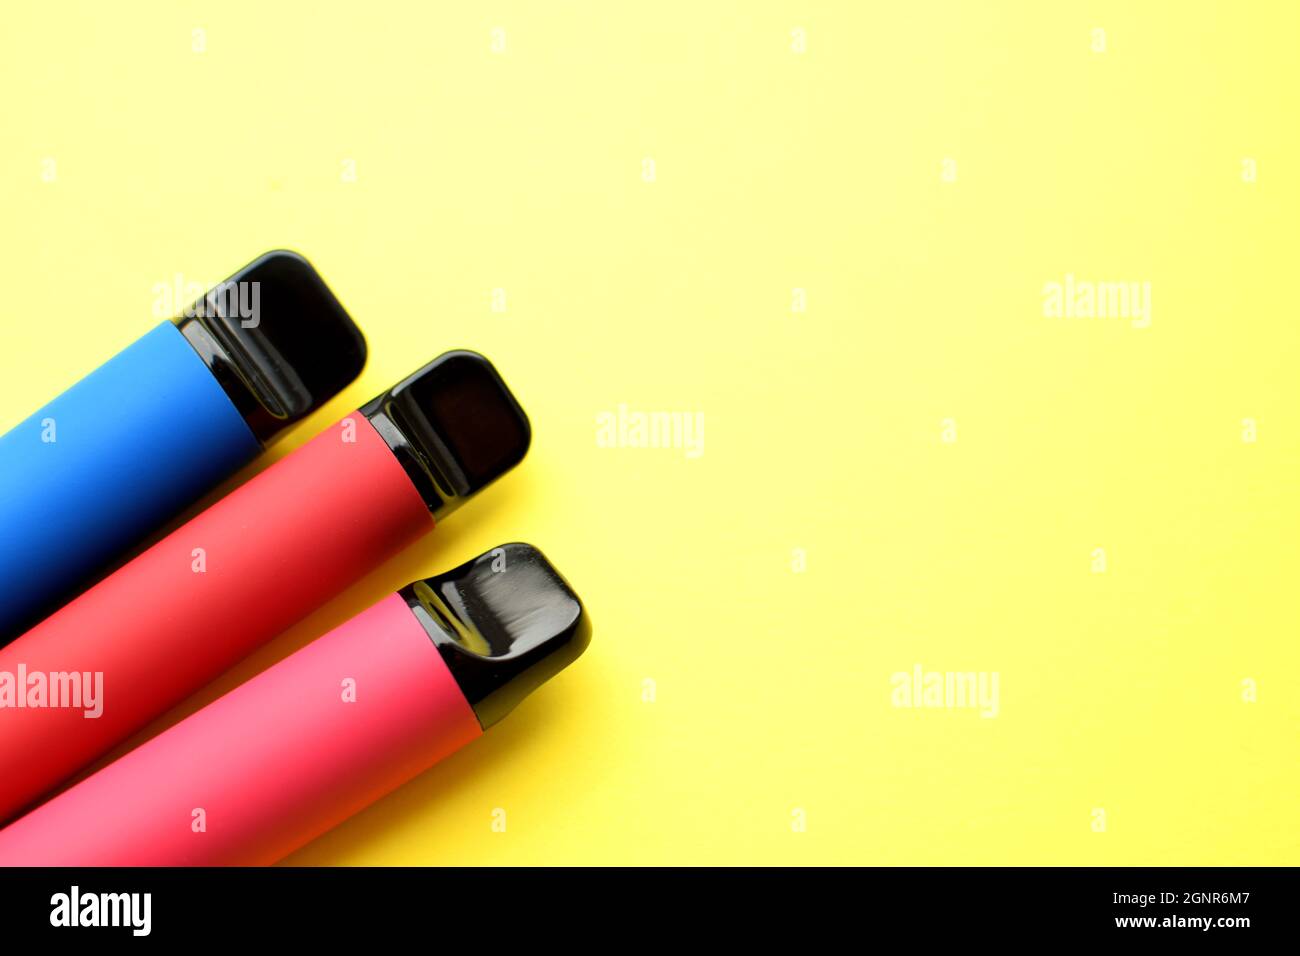 Three electronic cigarettes on a yellow background. Place for your text. Stock Photo